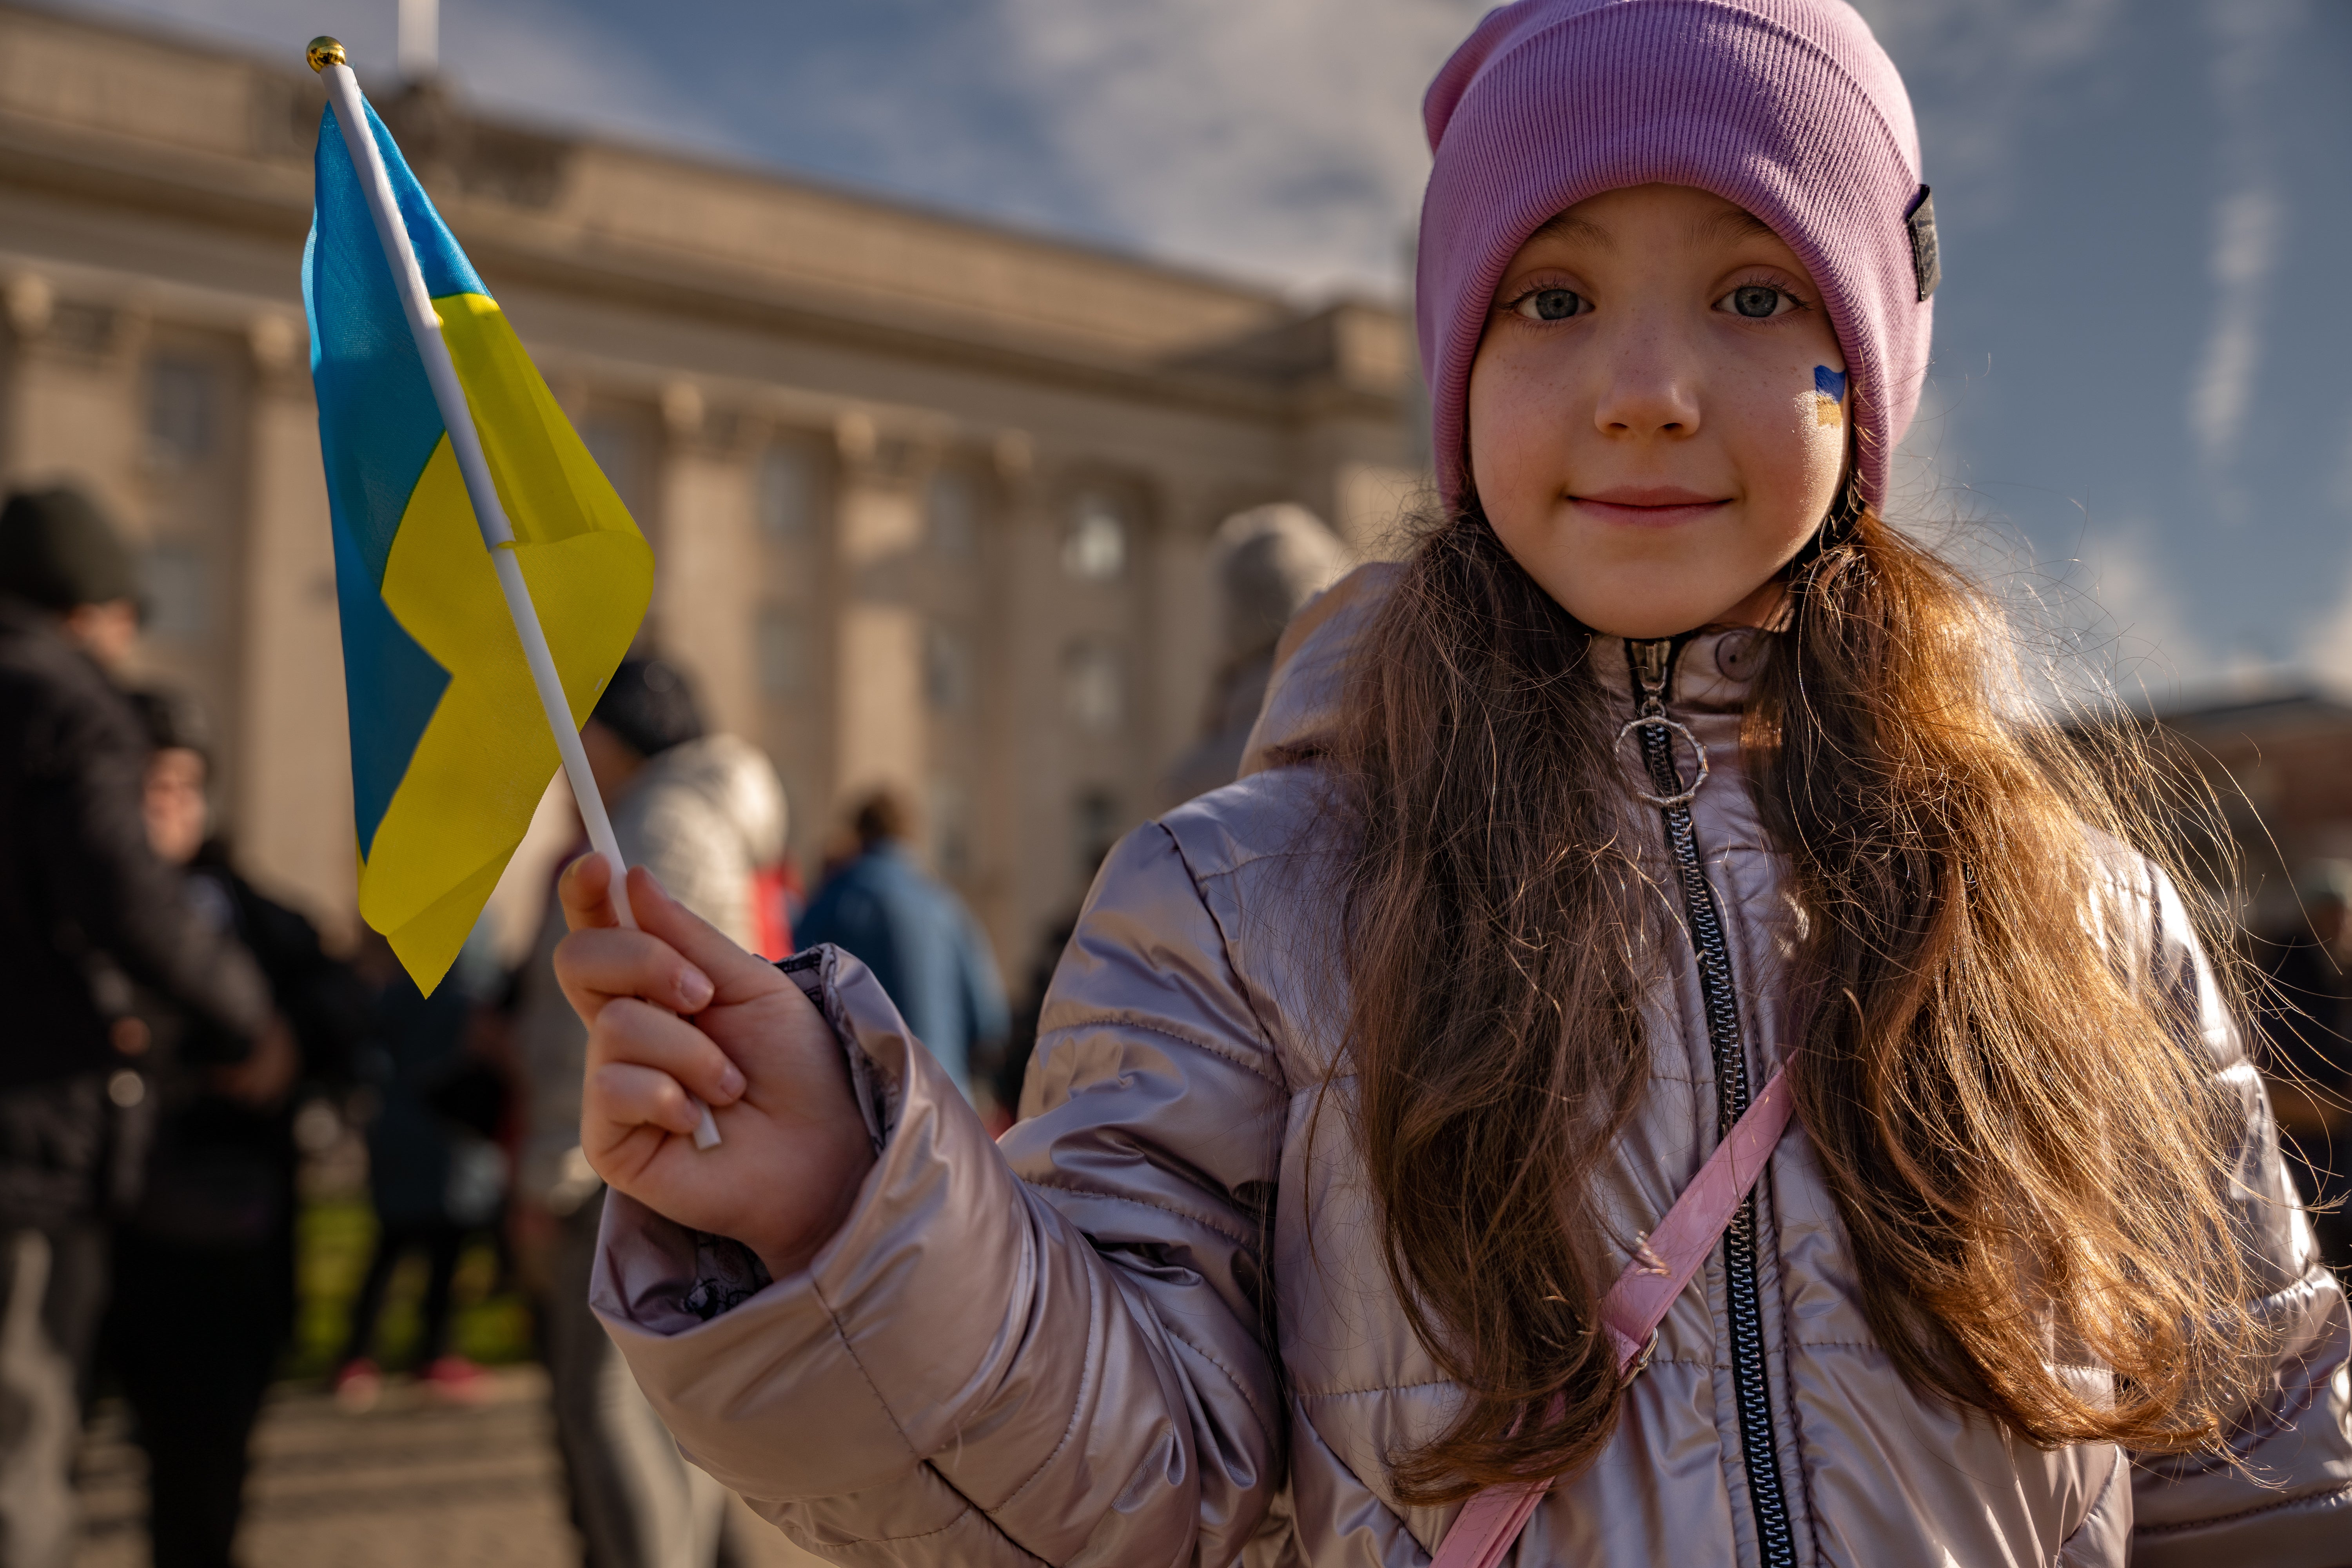 A girl waves a Ukrainian flag in celebration after months of Russian occupation